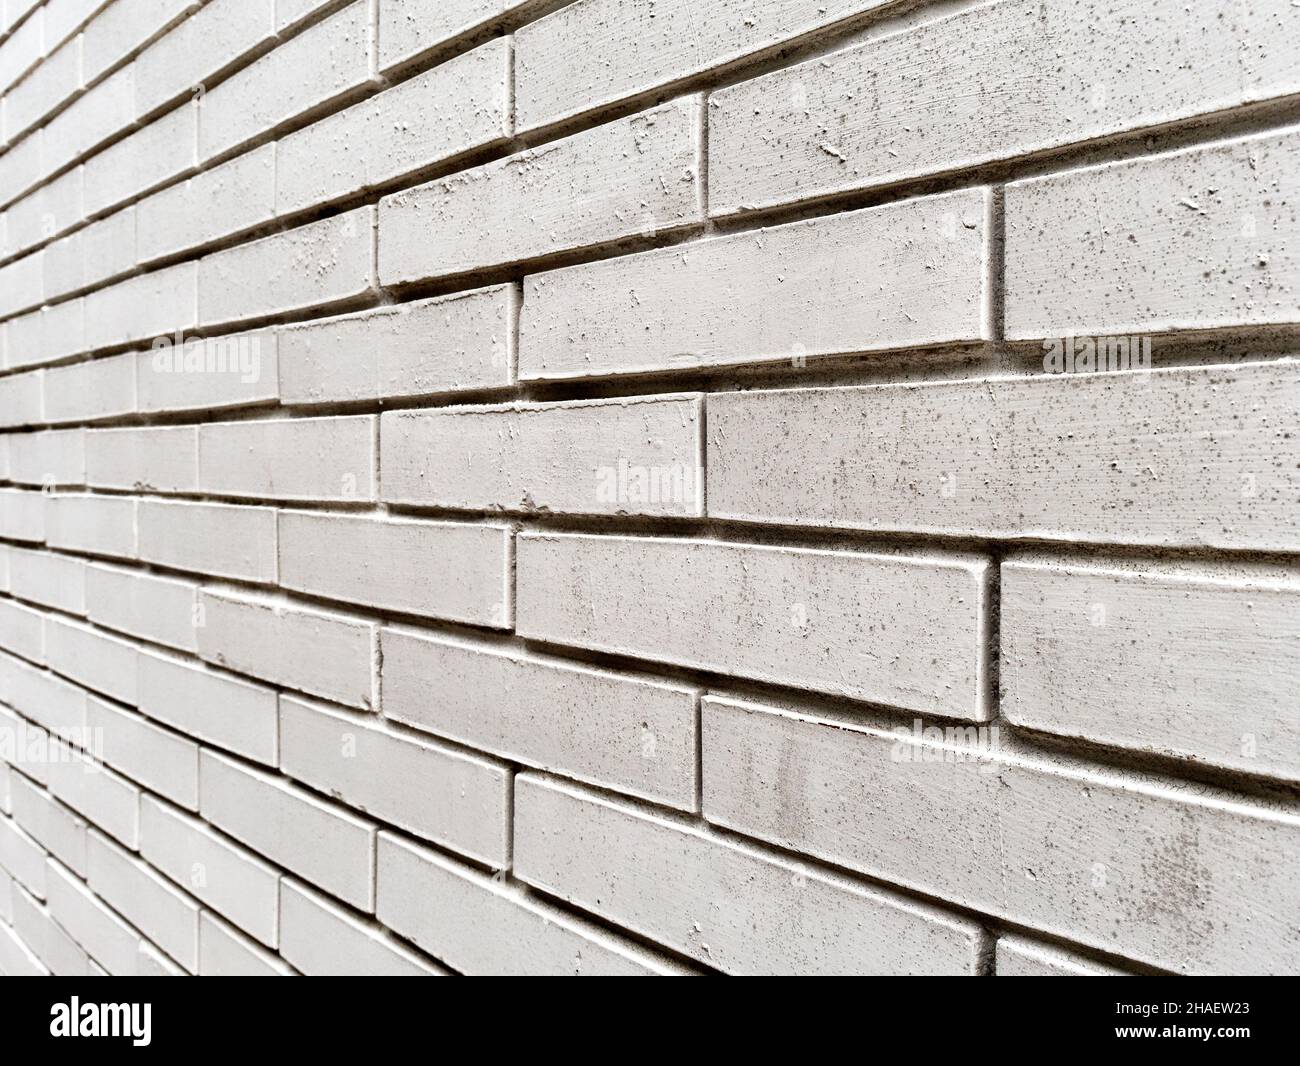 weathered textured white brick wall perspective view Stock Photo